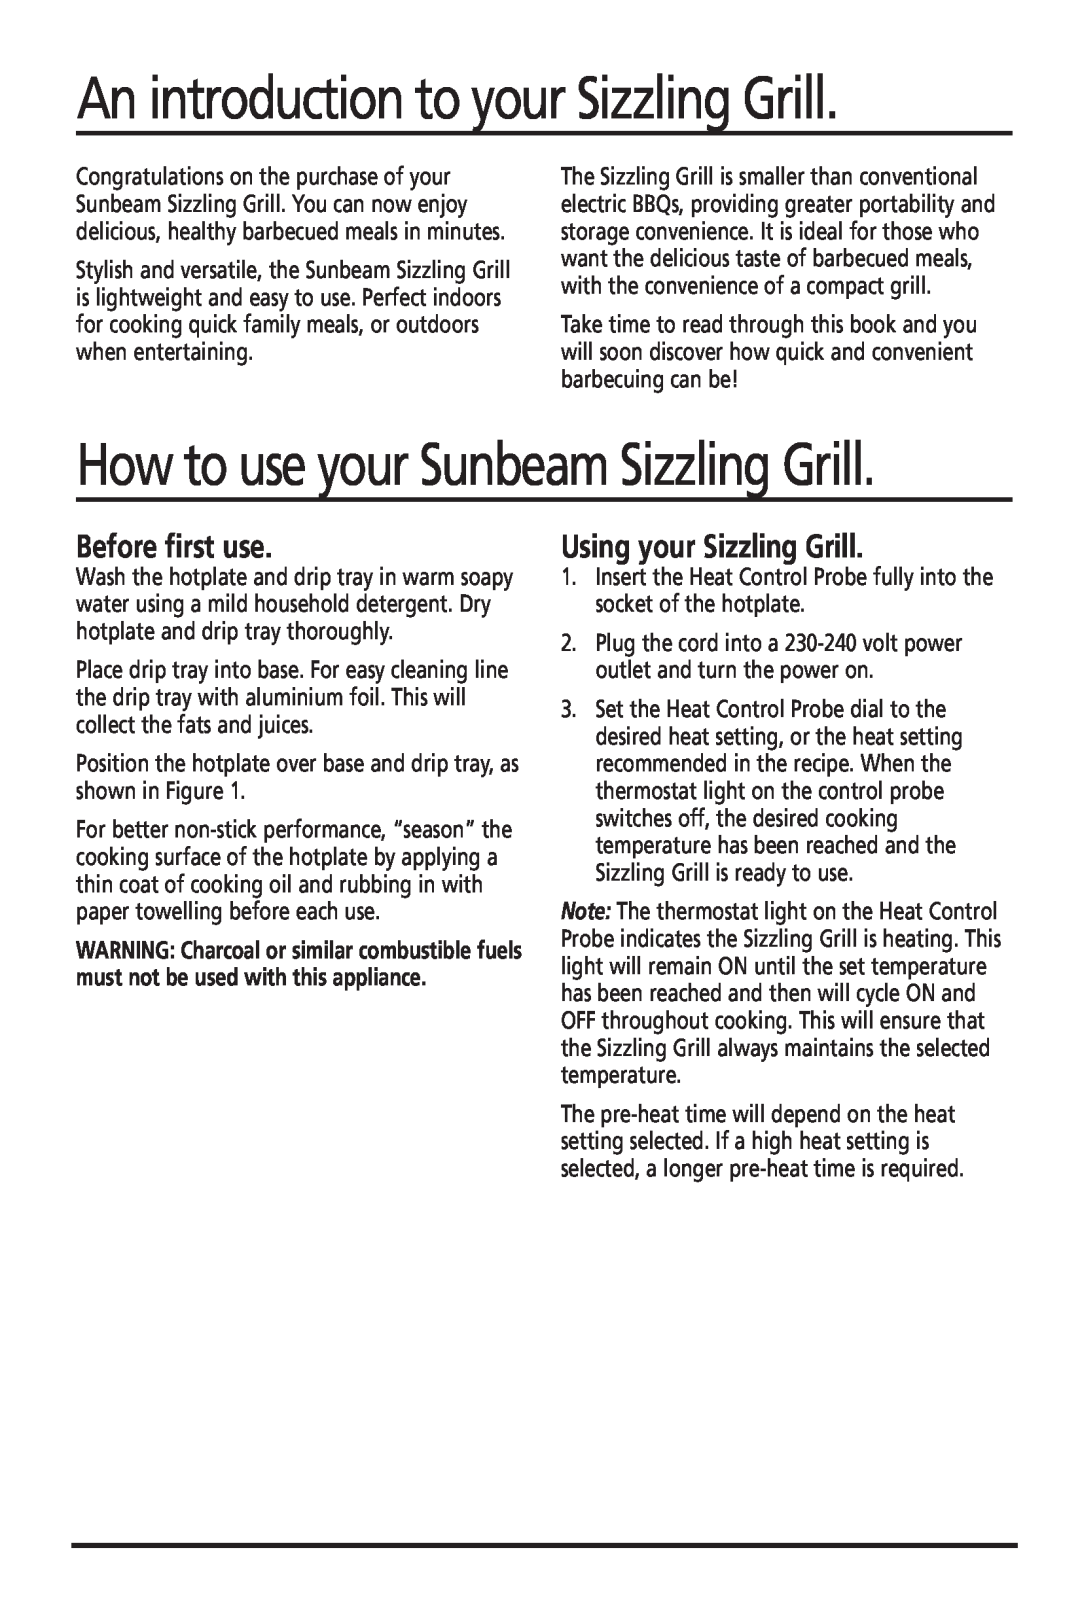 Sunbeam HG2300 manual An introduction to your Sizzling Grill, How to use your Sunbeam Sizzling Grill, Before first use 